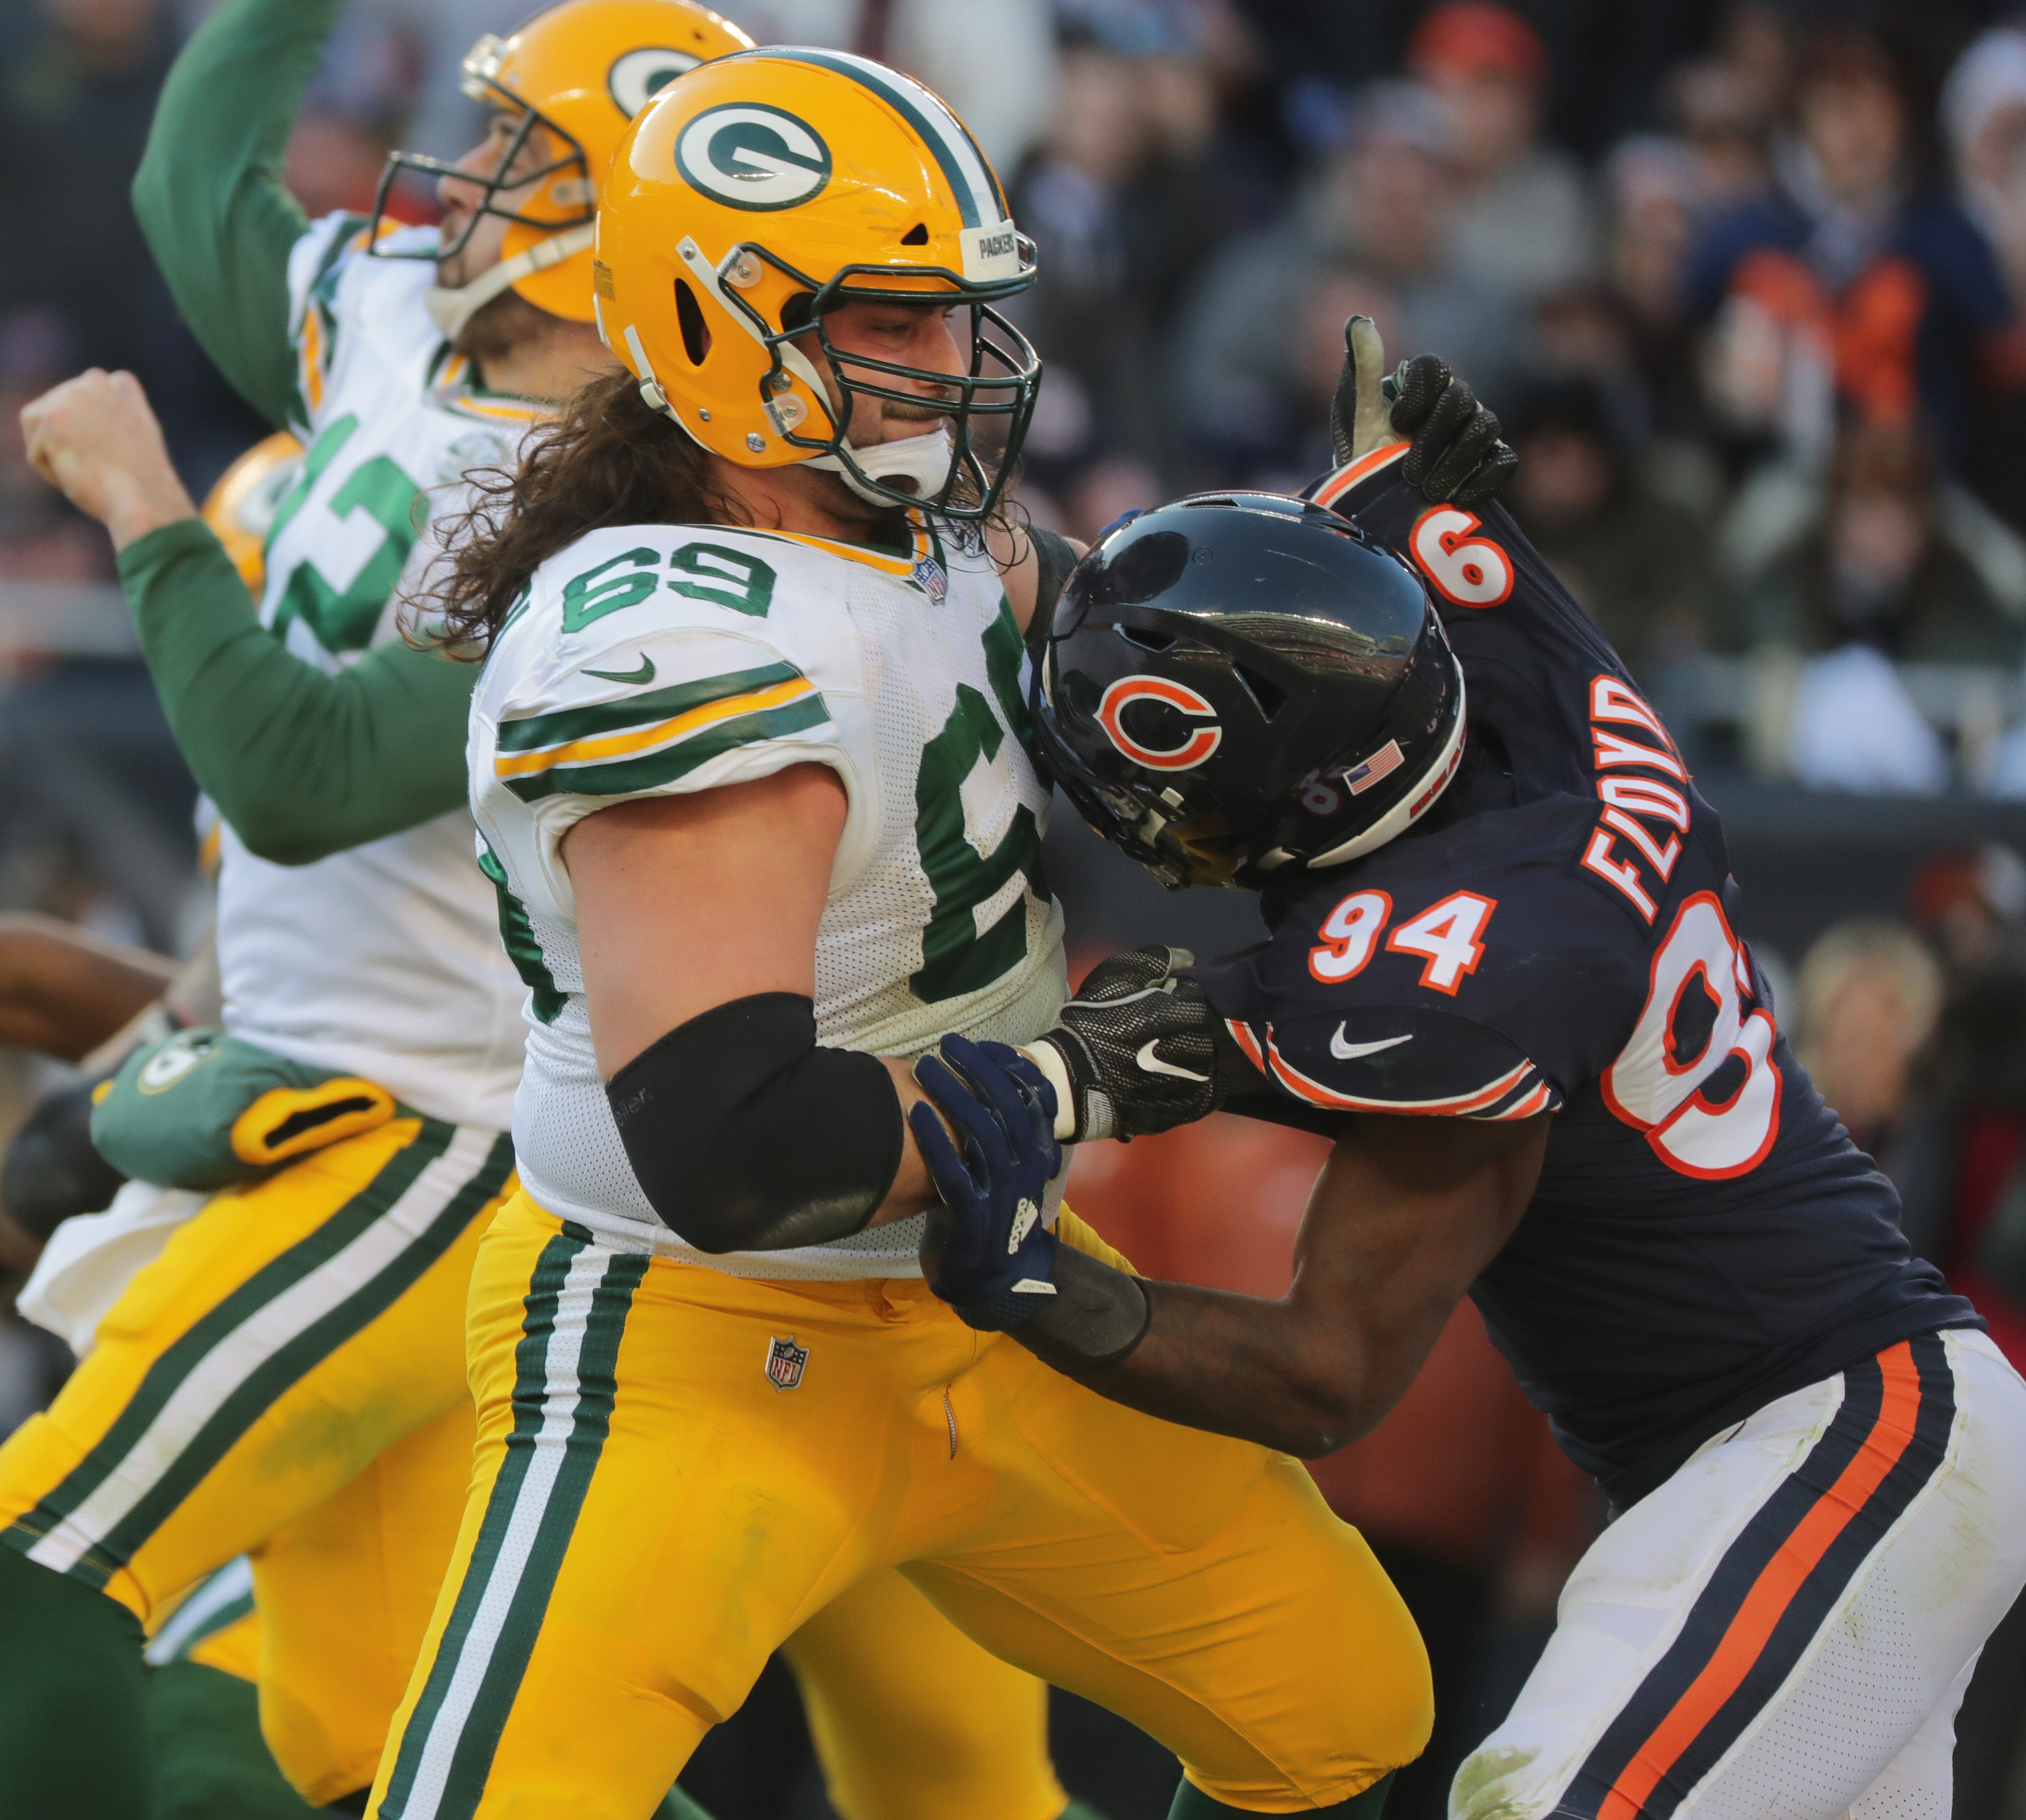 Green Bay Packers offensive tackle David Bakhtiari (69) blocks Chicago Bears outside linebacker Leonard Floyd (94) during the fourth quarter of their game Sunday, December 25, 2018 at Soldier Field in Chicago, Ill. The Chicago Bears beat the Green Bay Packers 24-17.

MARK HOFFMAN/MILWAUKEE JOURNAL SENTINEL